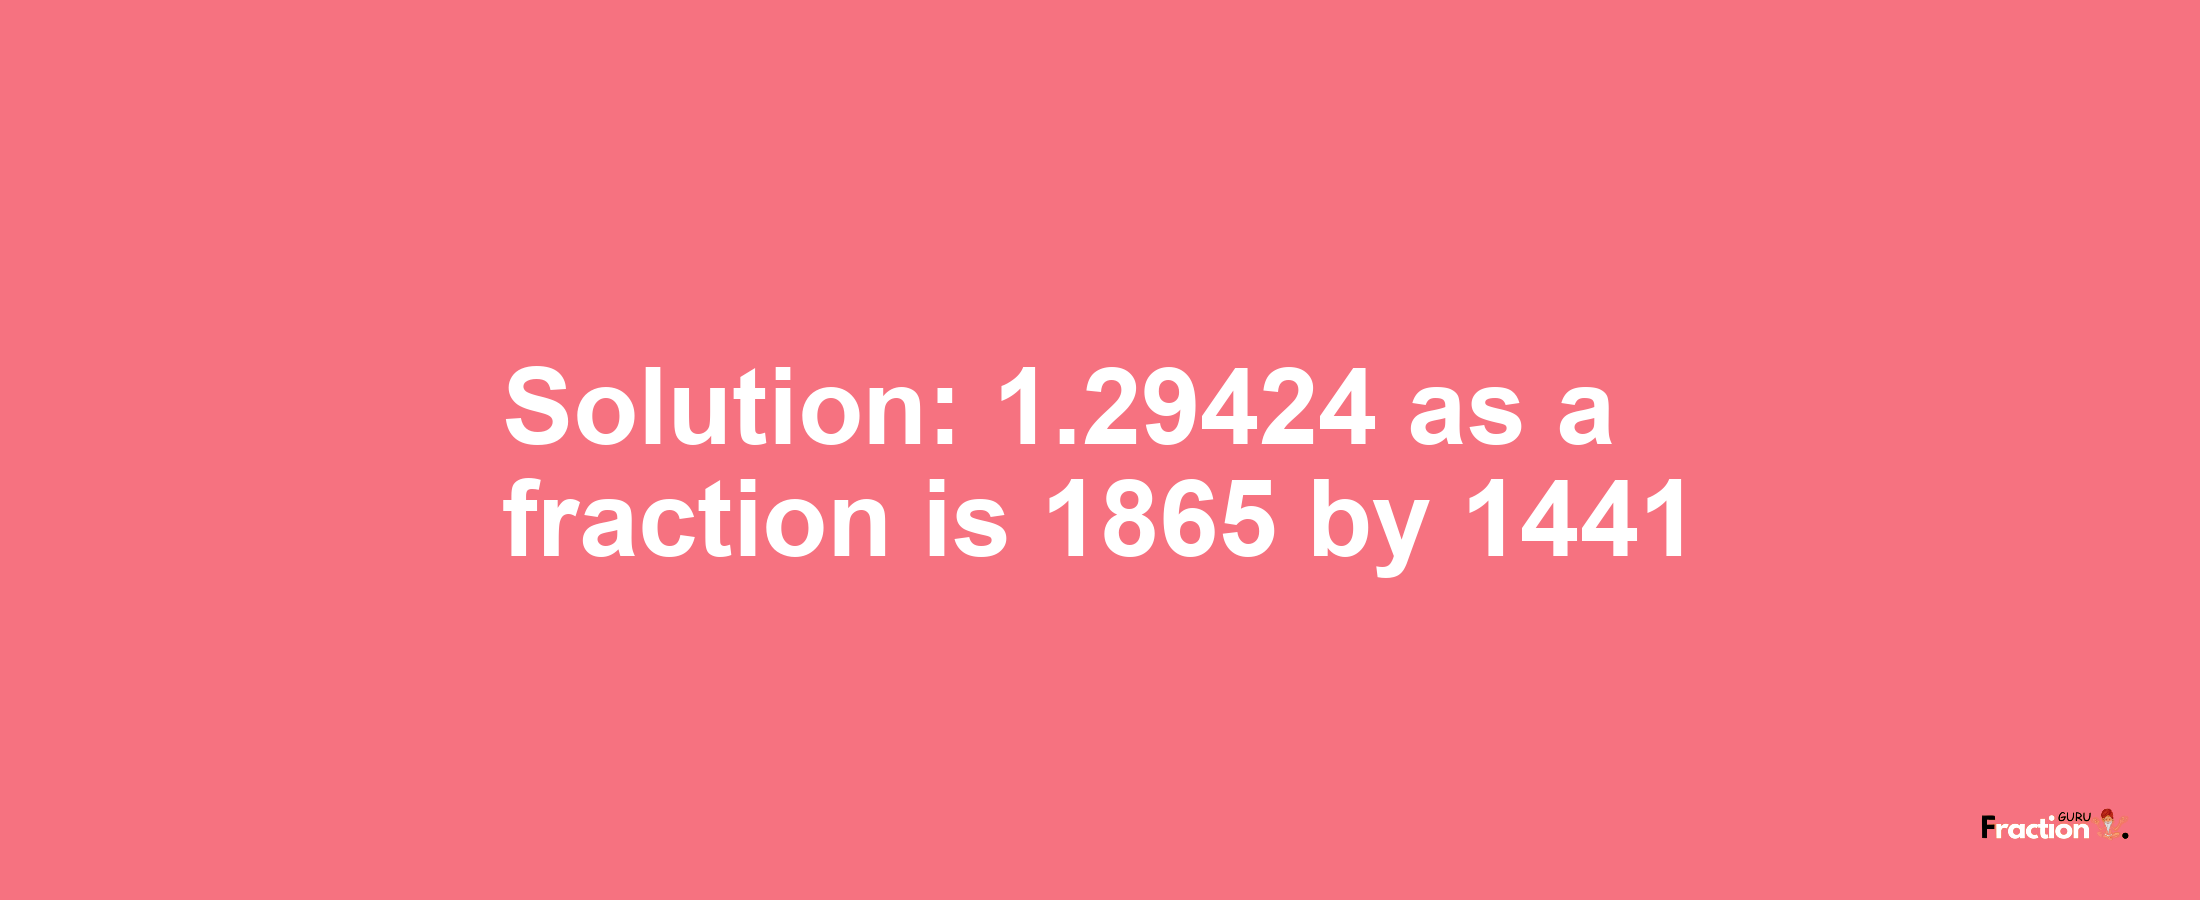 Solution:1.29424 as a fraction is 1865/1441